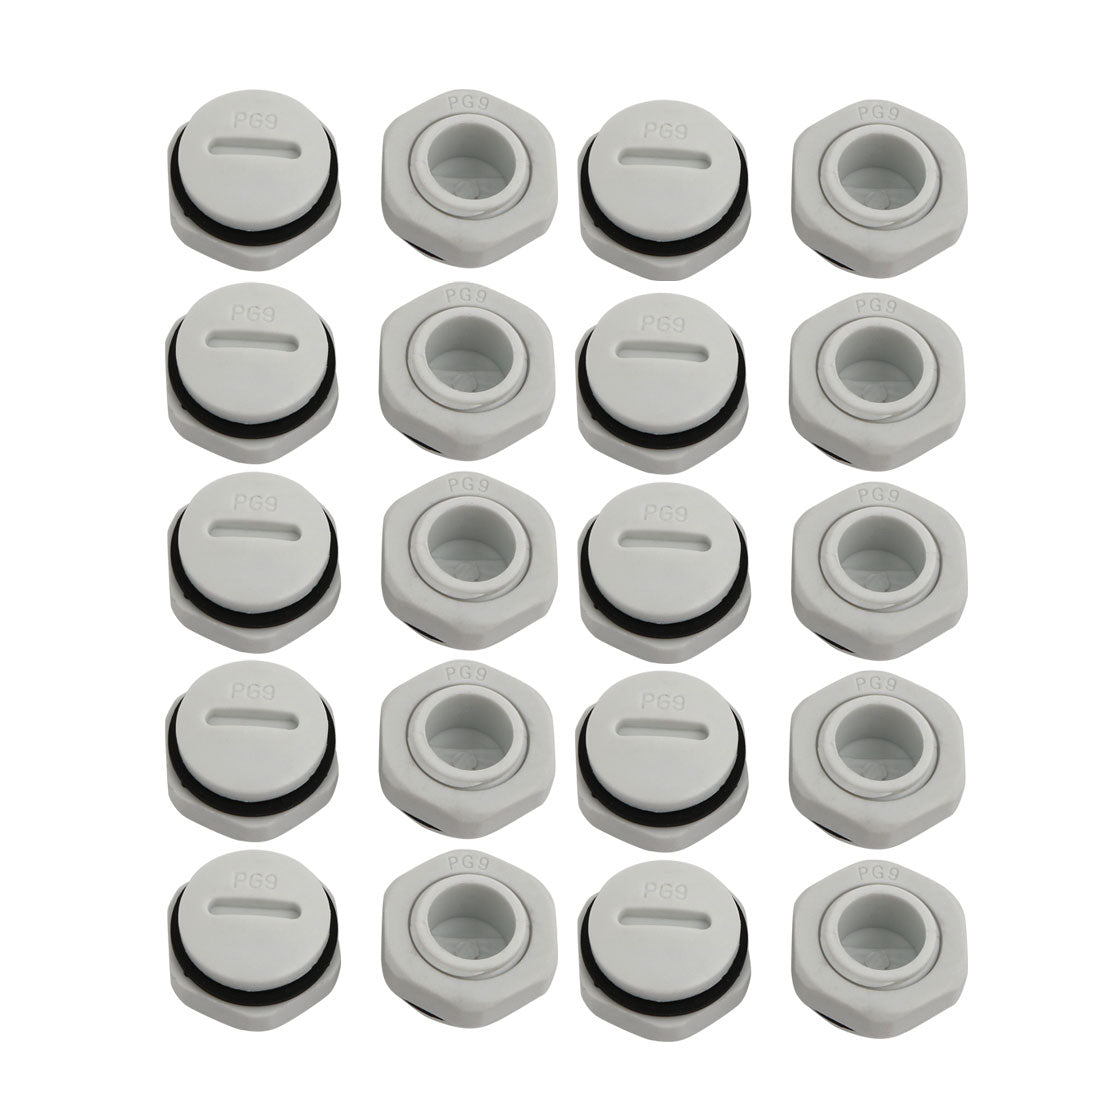 uxcell Uxcell 20pcs GLW-PG9 Nylon Threaded Cable Gland Cap Round Screw-in Cover Gray w Washer